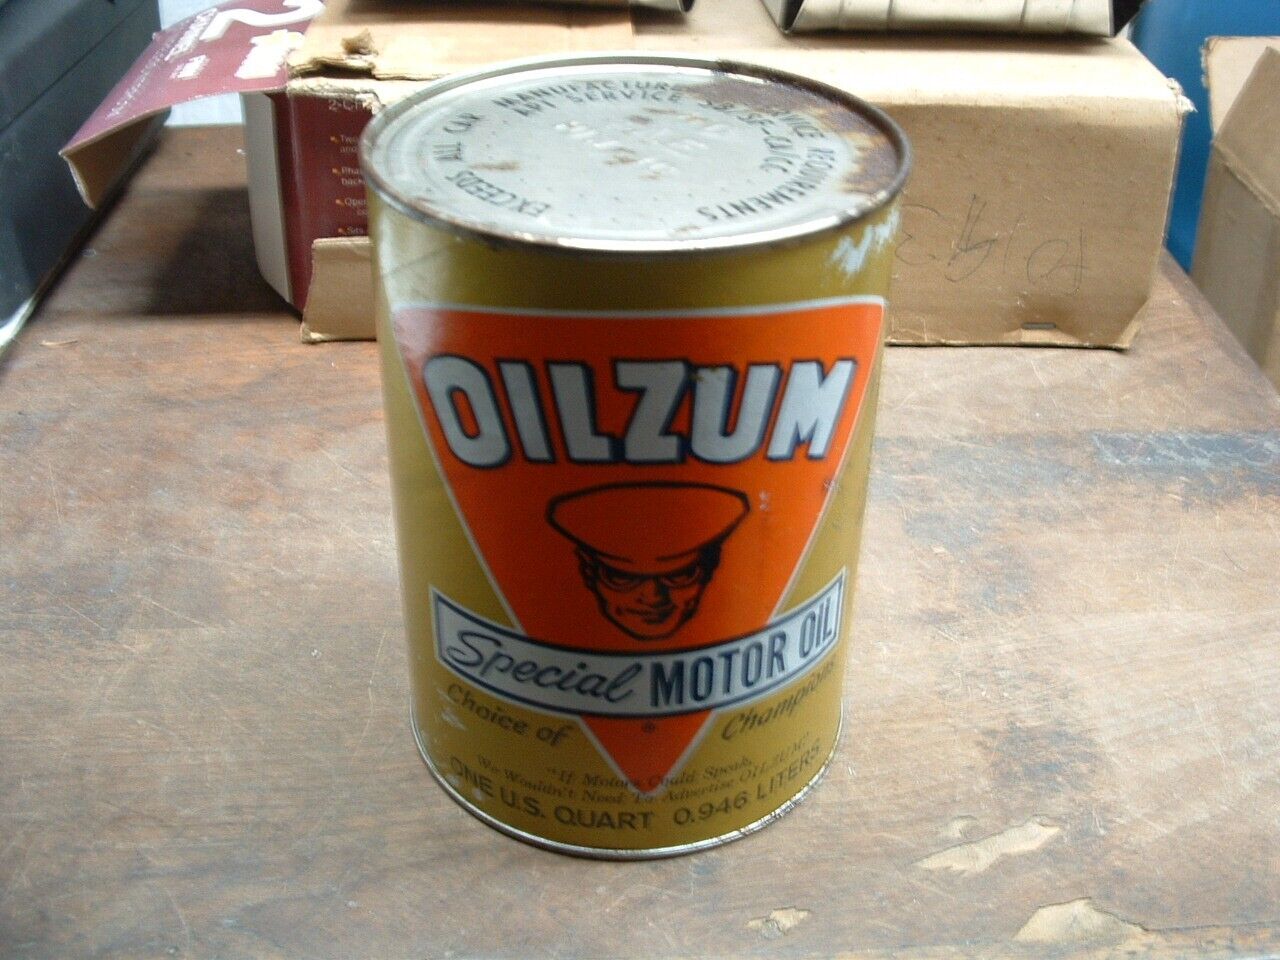 VINTAGE OILZUM SPECIAL NOS FULL CAN OF MOTOR OIL WHITE + BAGLEY WORCESTER, MA.